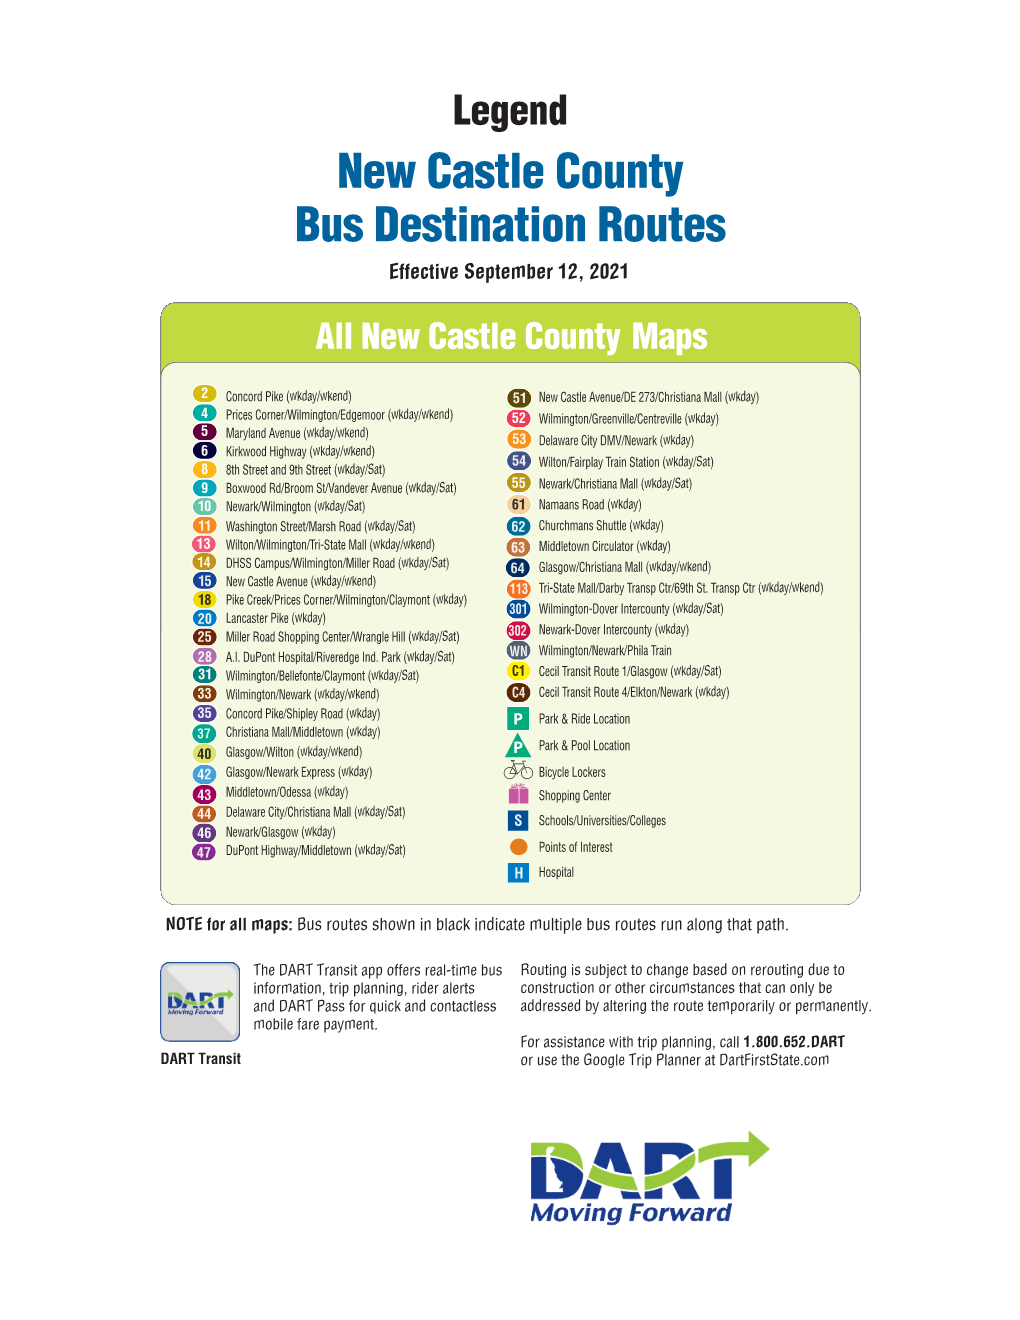 New Castle County Transit Routes